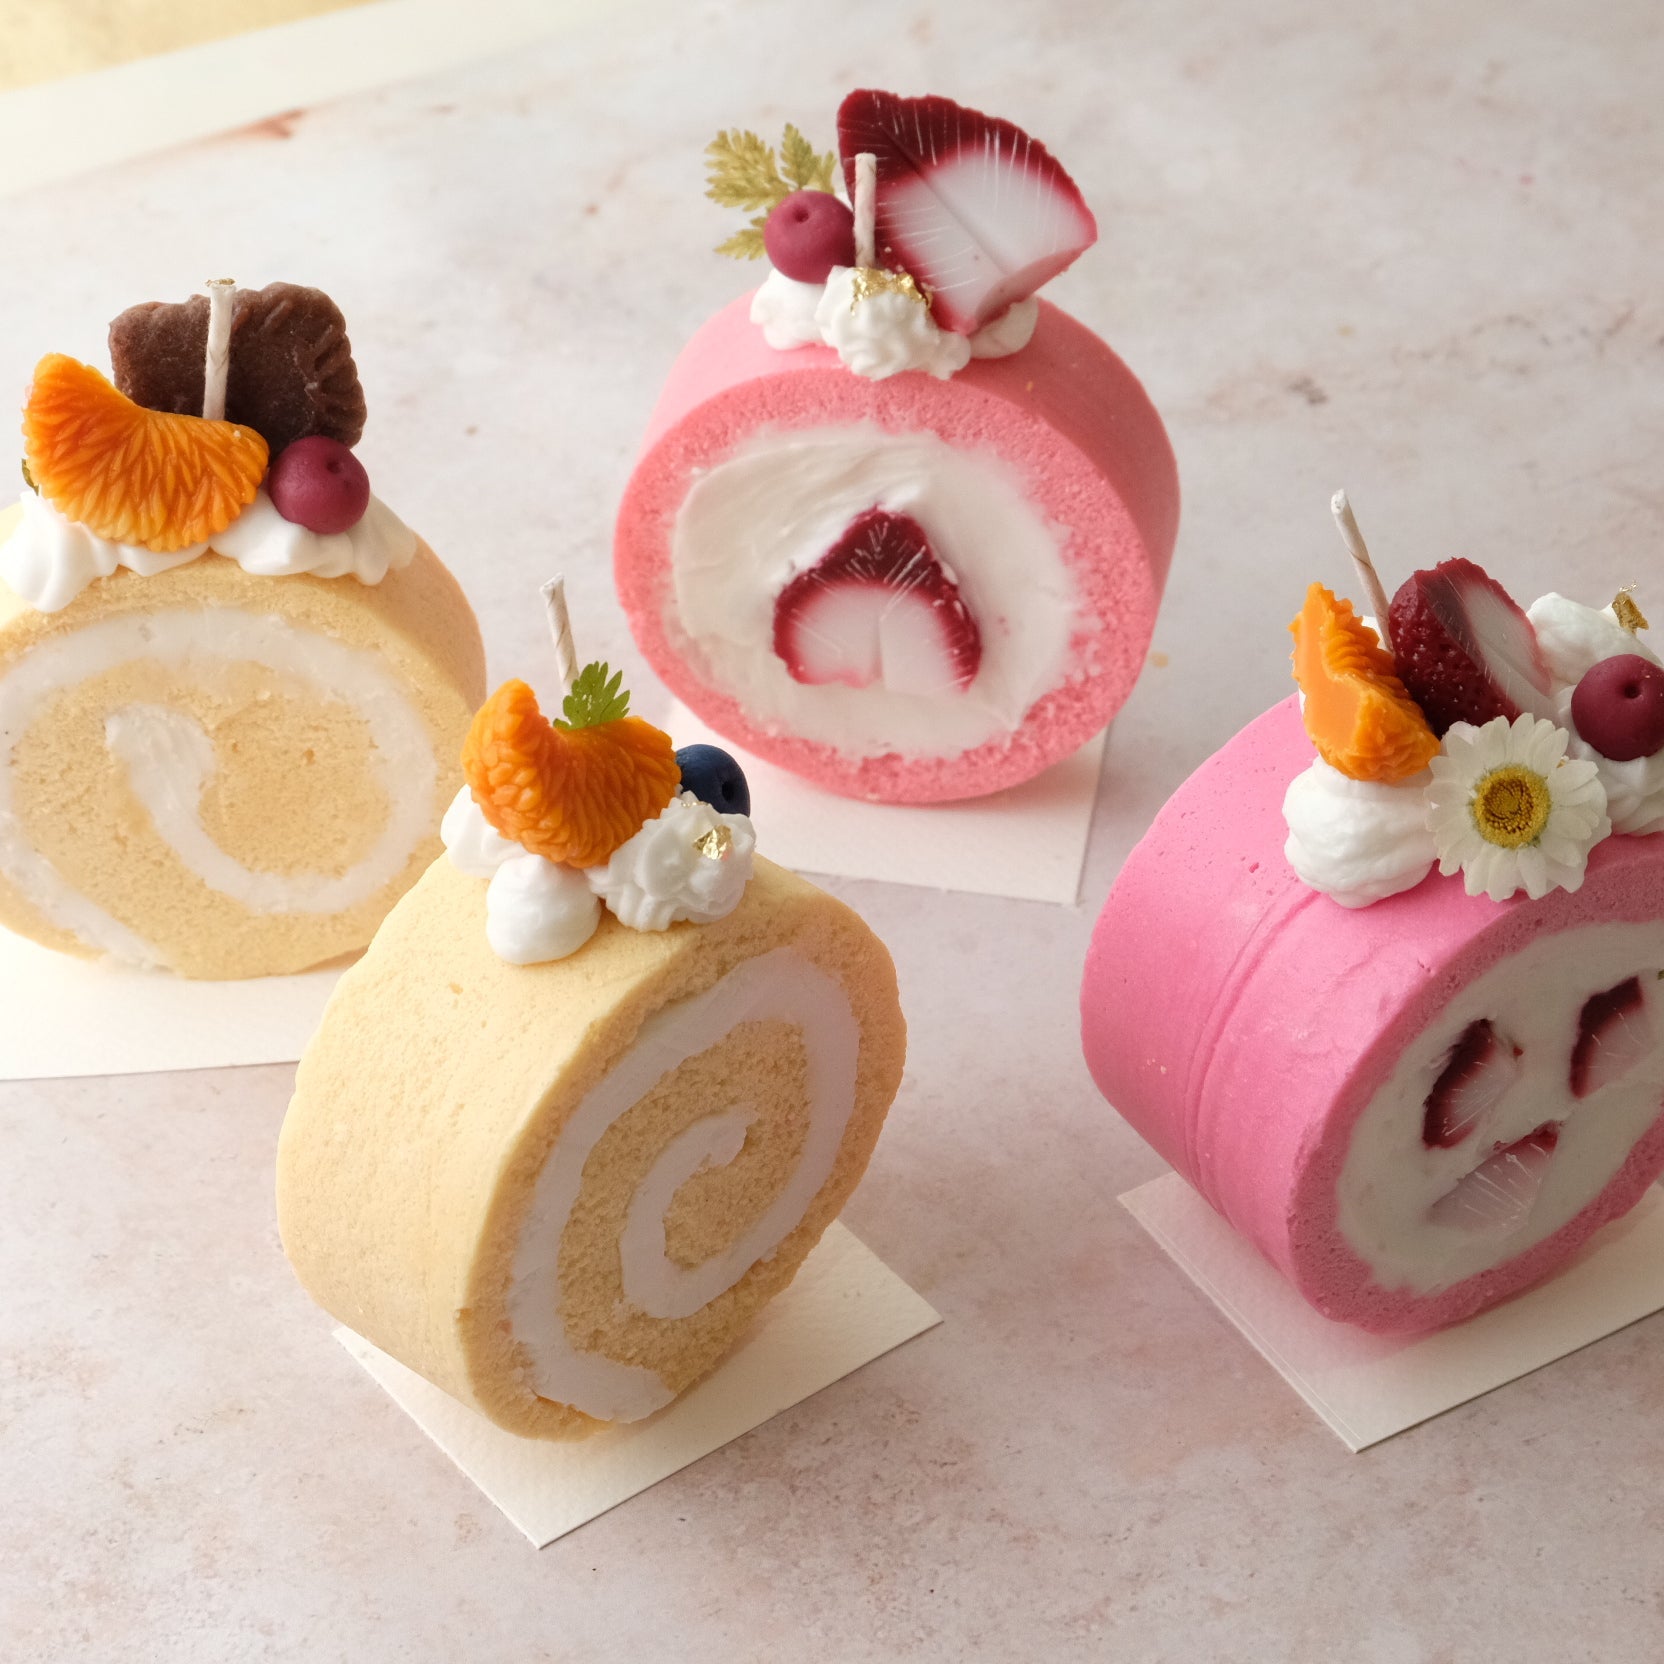 Swiss Roll Baking Candle Cake